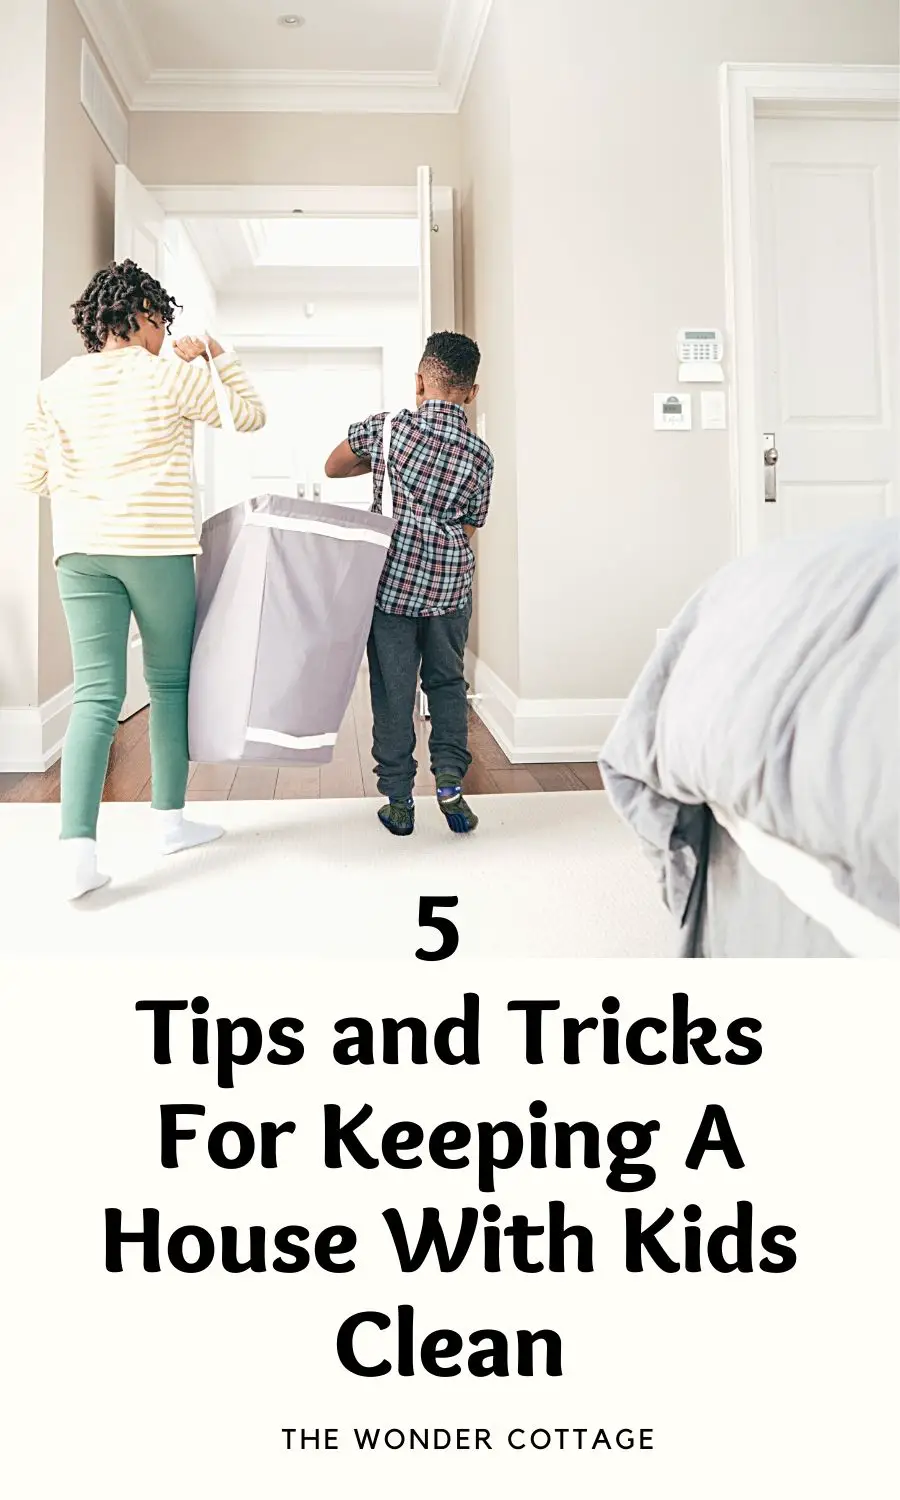 5 Tips and Tricks For Keeping A House With Kids Clean